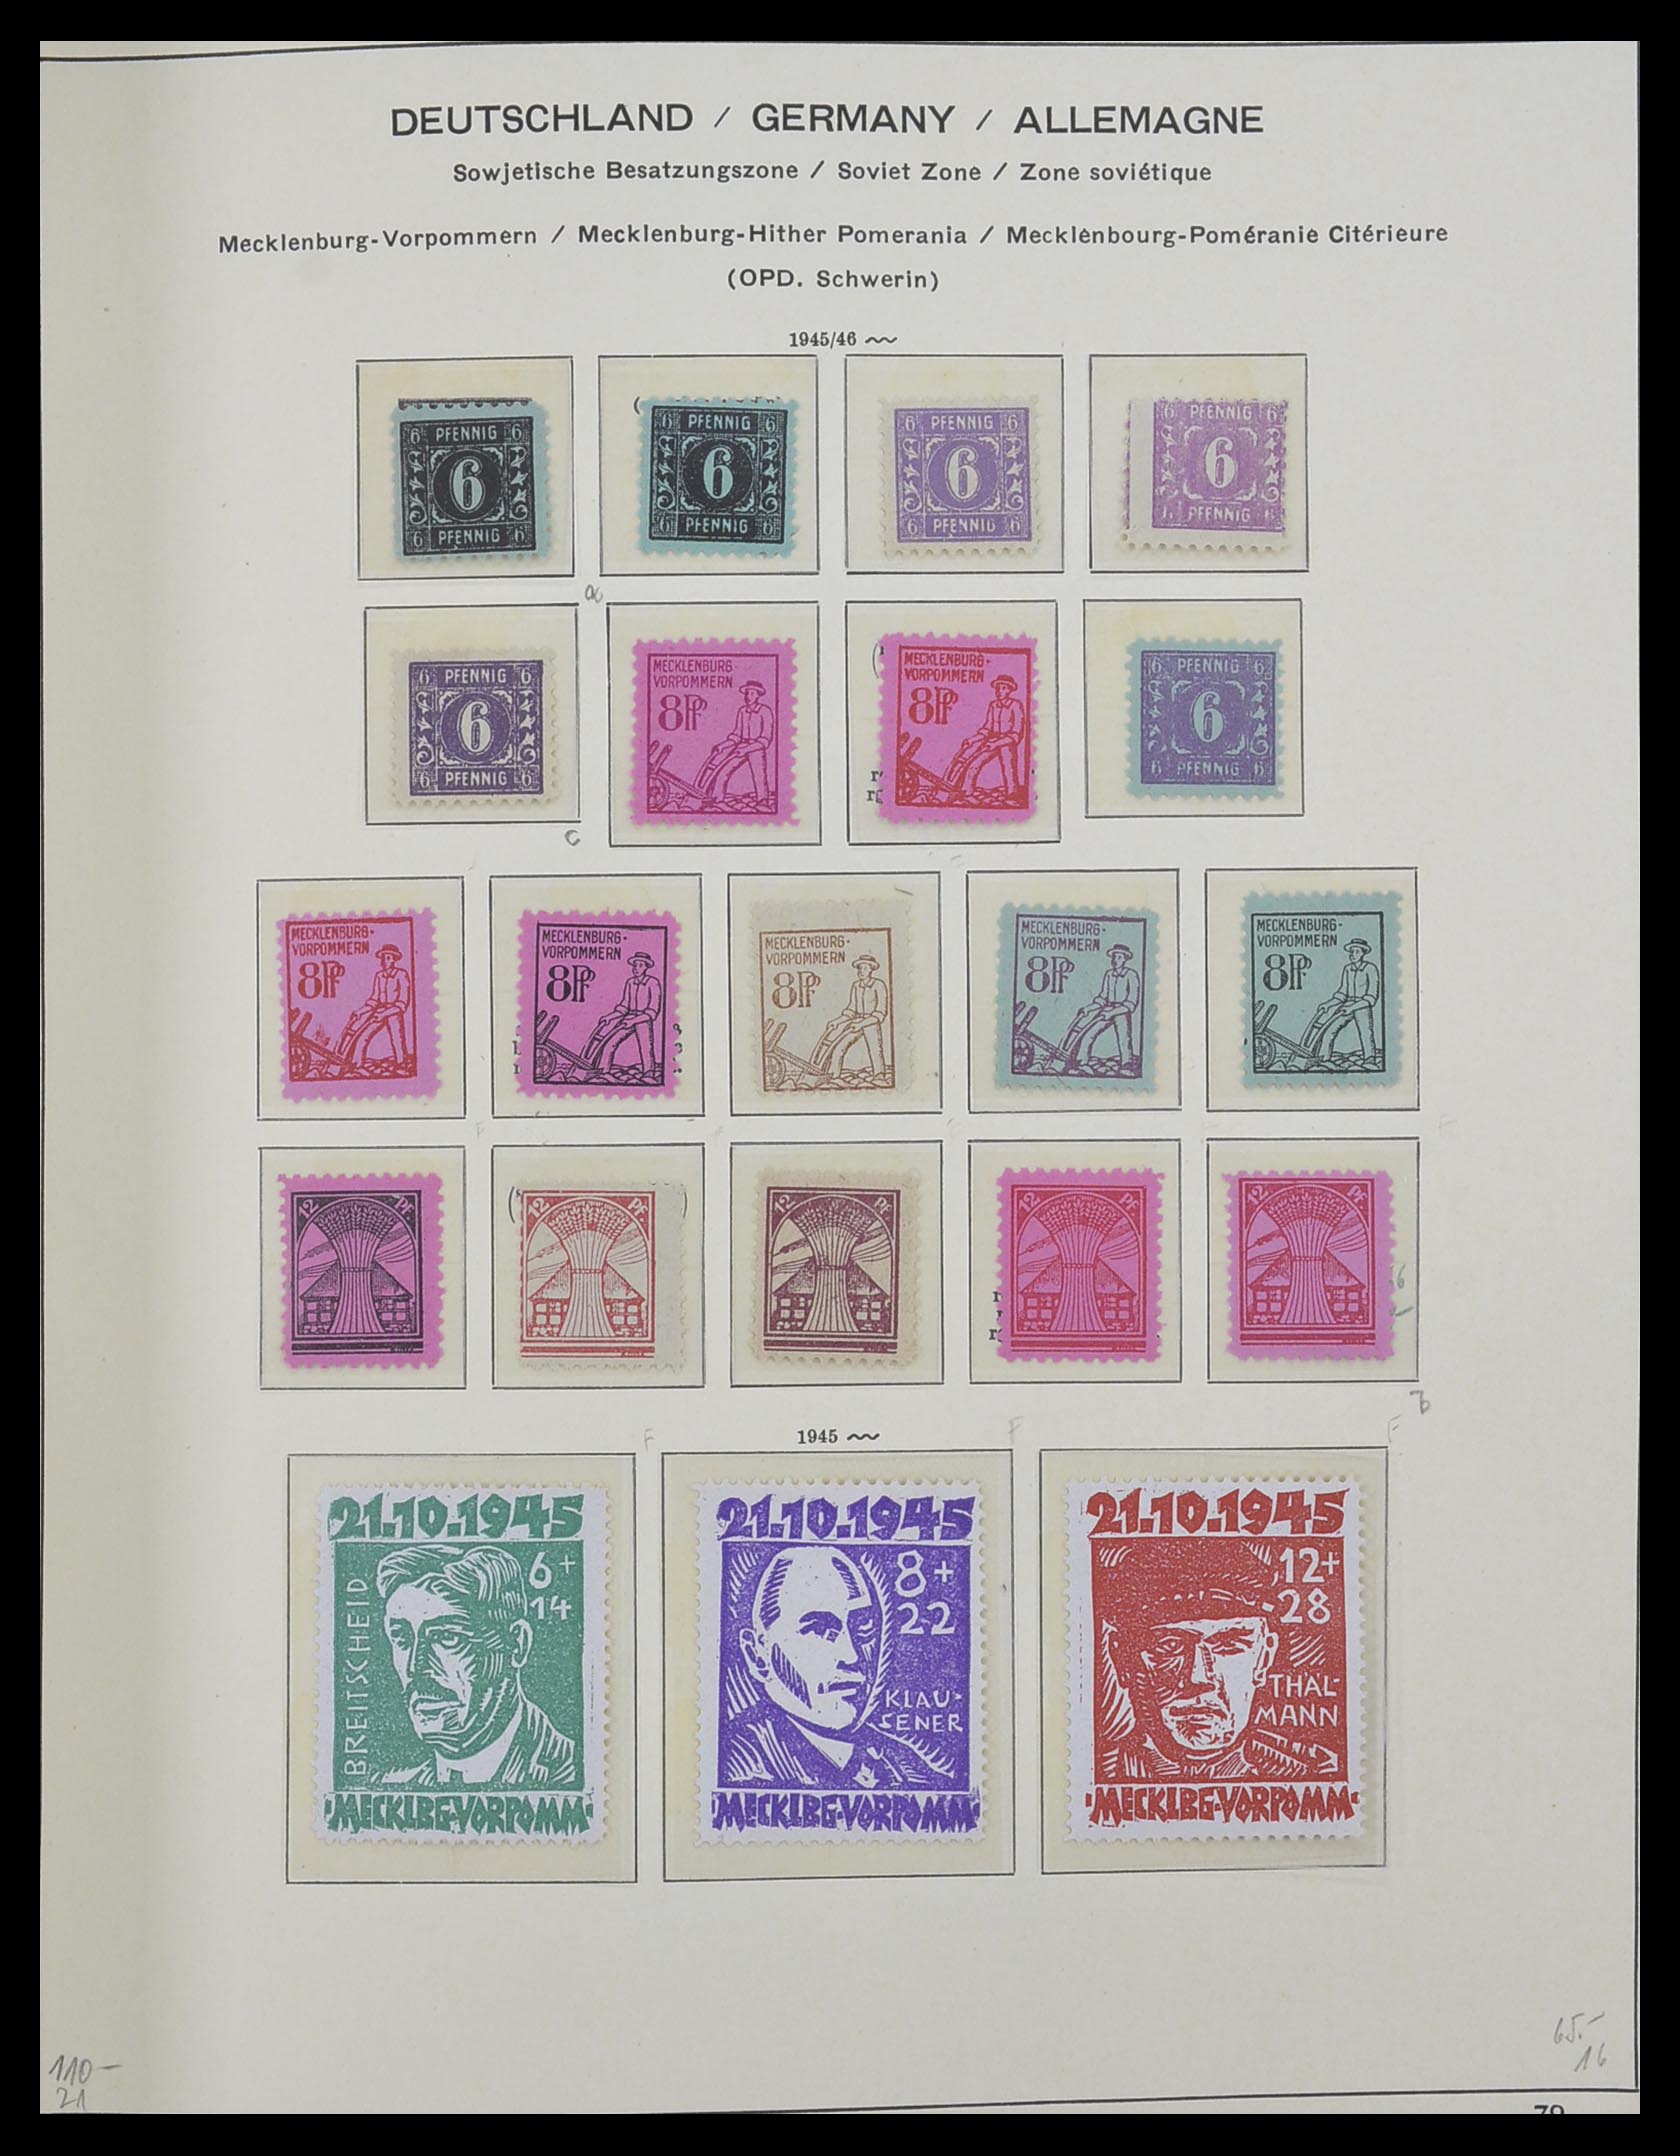 33281 023 - Stamp collection 33281 DDR 1945-1990.